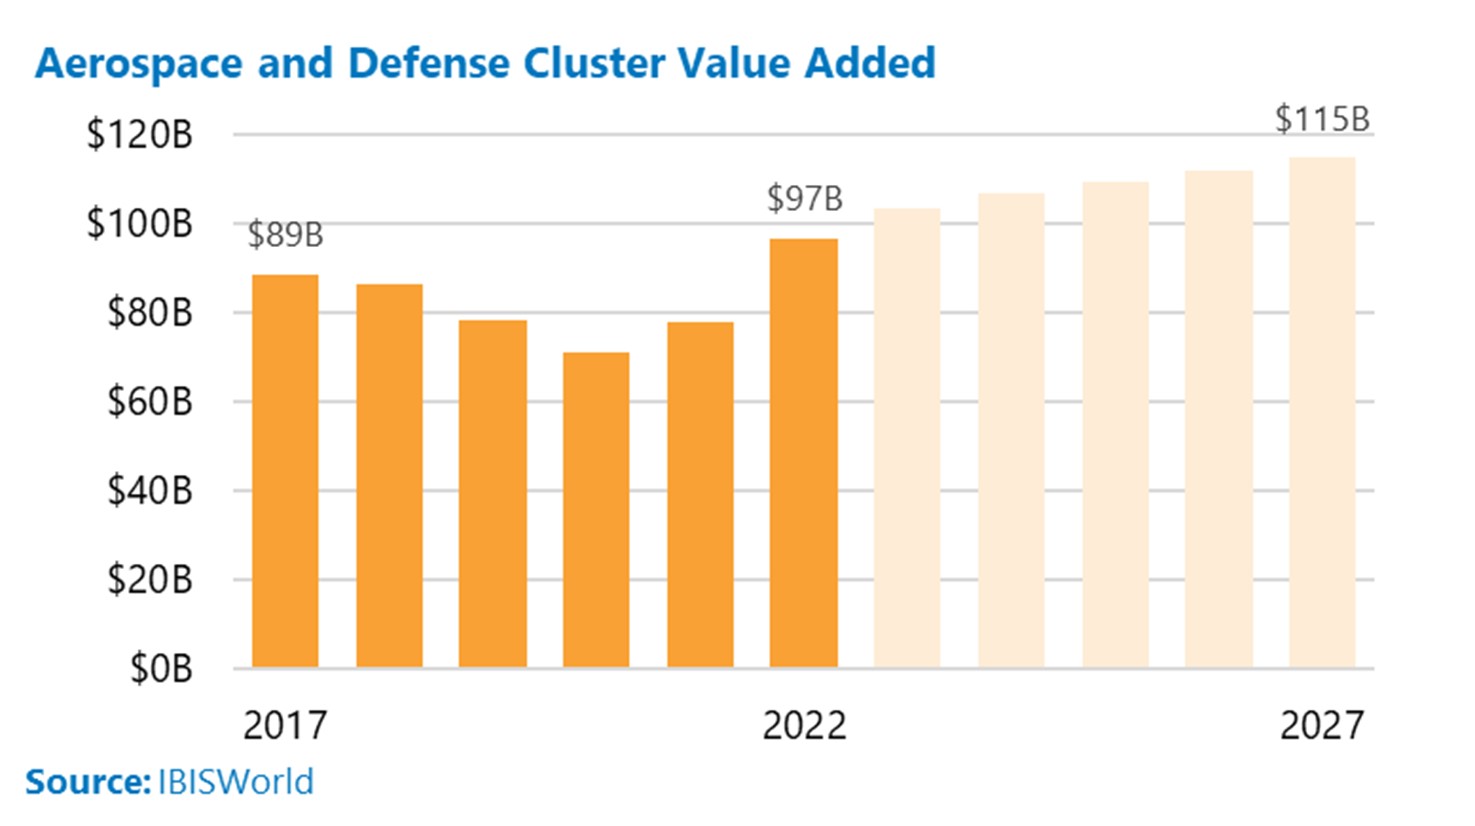 Bar chart showing actual and anticipated value added for the Aerospace and Defense cluster from 2017 to 2027